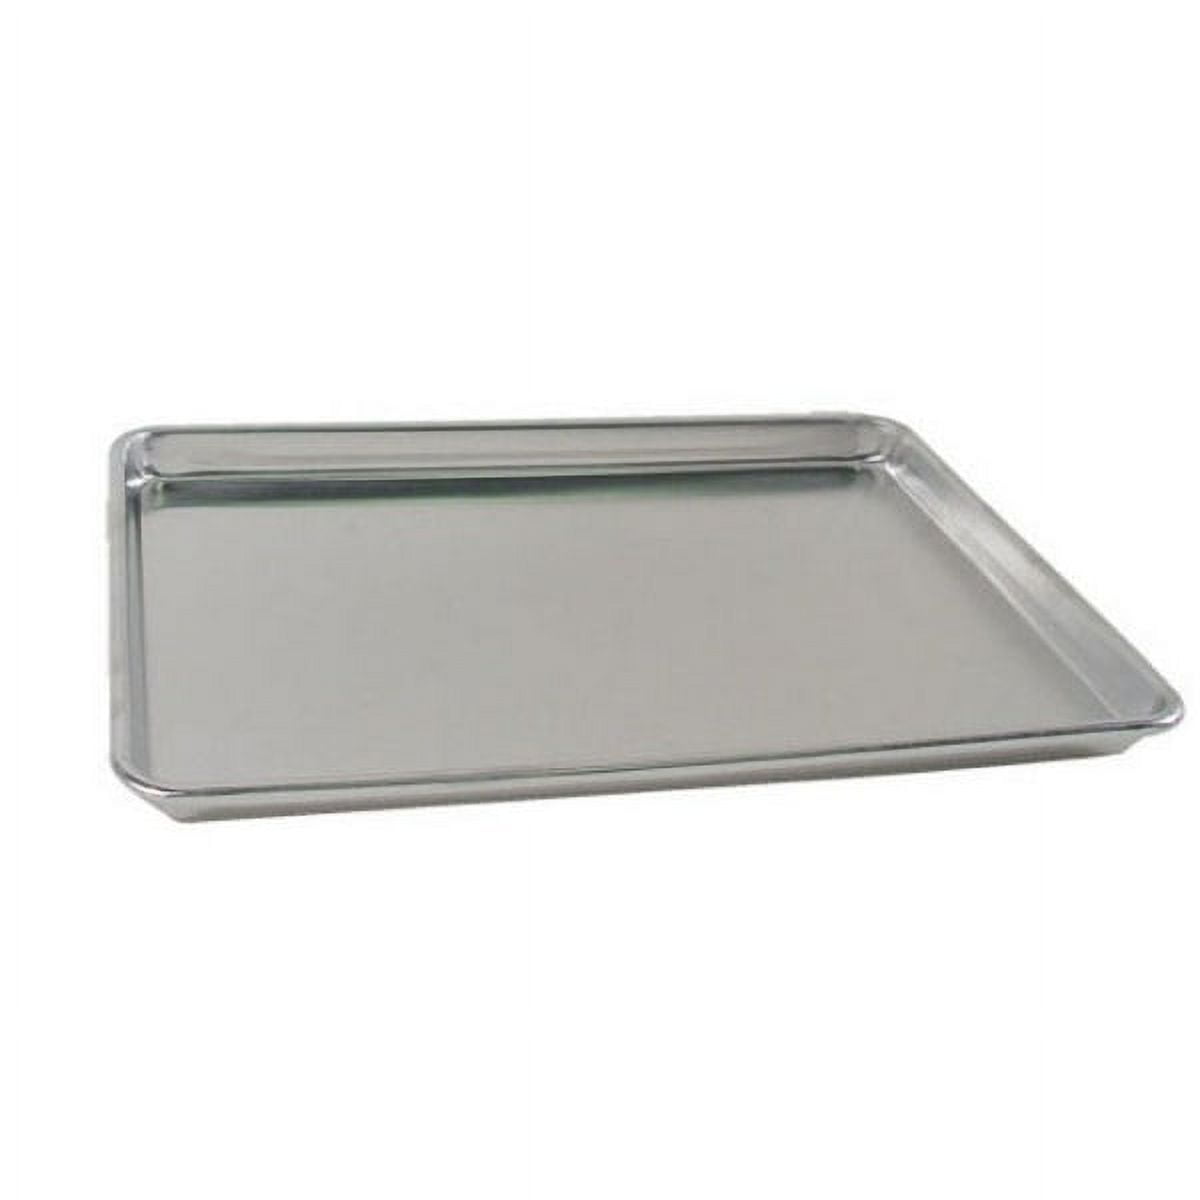 Vintage Air Bake Double Wall Aluminum Pan by Wearever Aluminum Insulated  Bakeware 9 X 13 X 2 1/4 